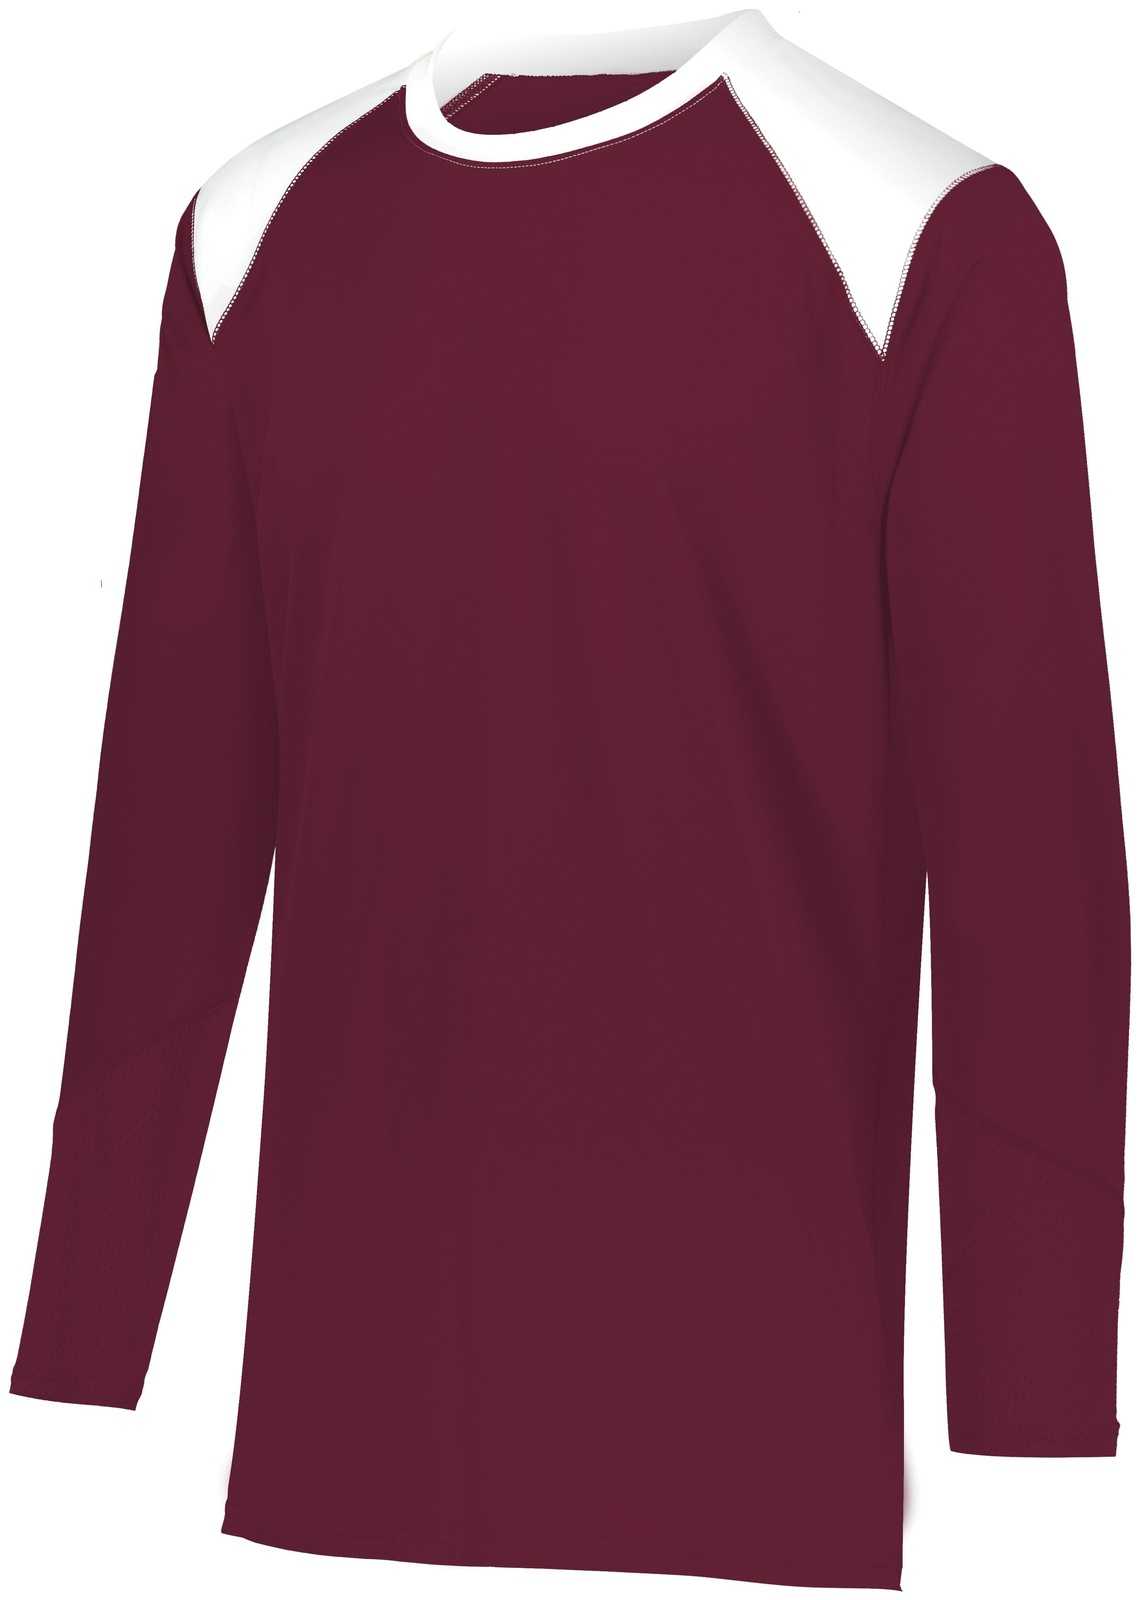 Augusta 1728 Tip-Off Shooter Shirt - Maroon White - HIT a Double